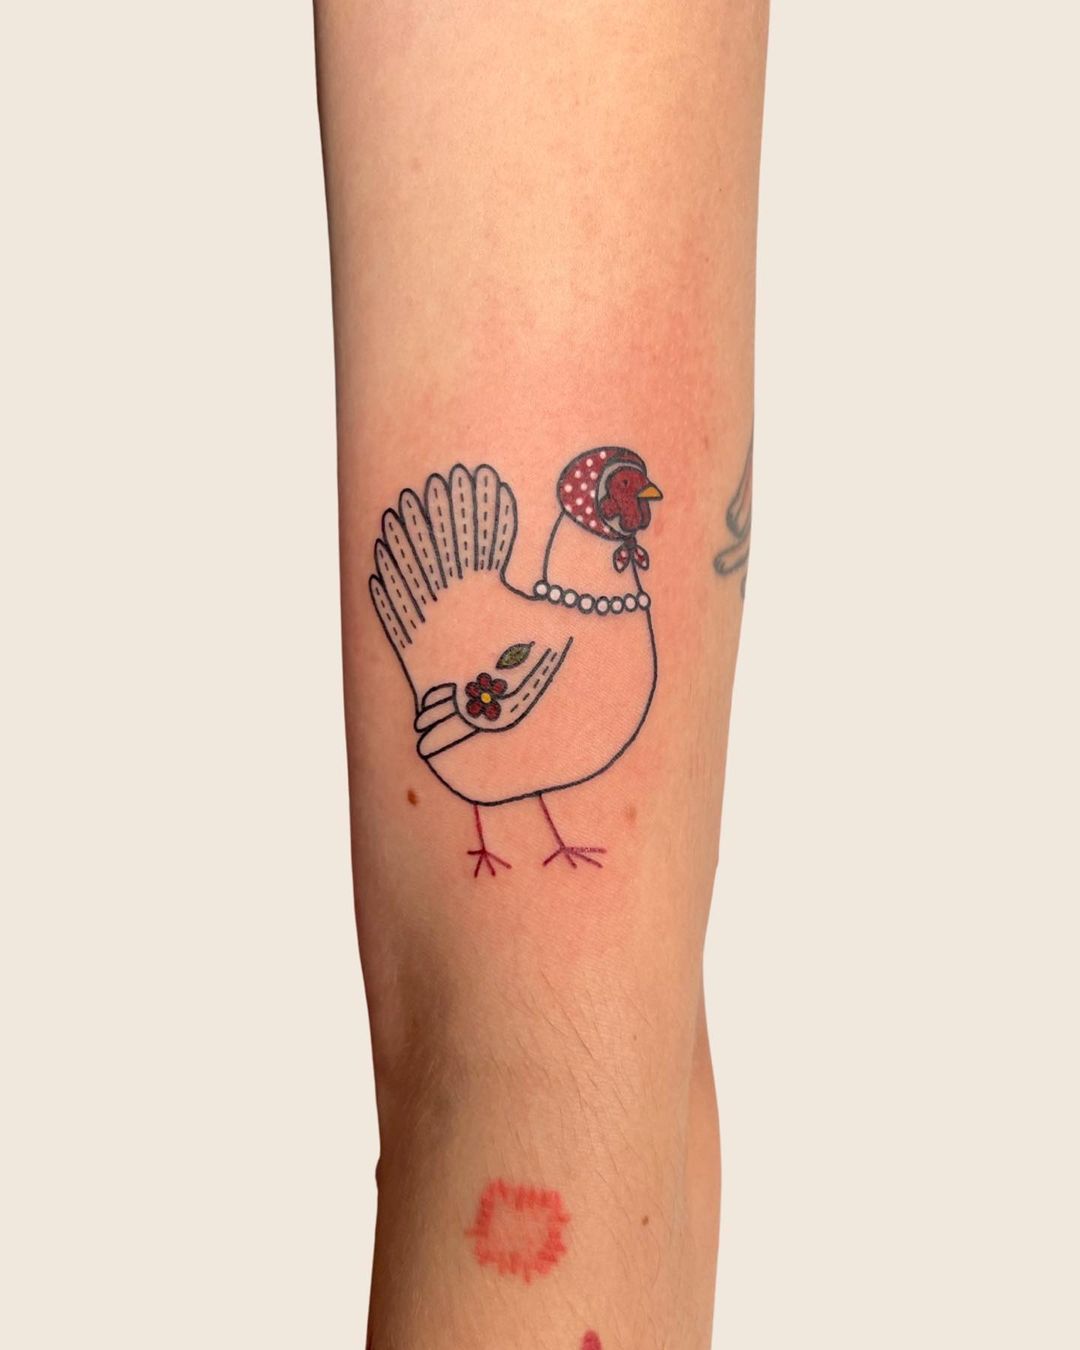 10 Best Chicken Tattoo Ideas Youll Have To See To Believe  Outsons   Mens Fashion Tips And Style Guides  Chicken tattoo Western tattoos Hen  tattoo